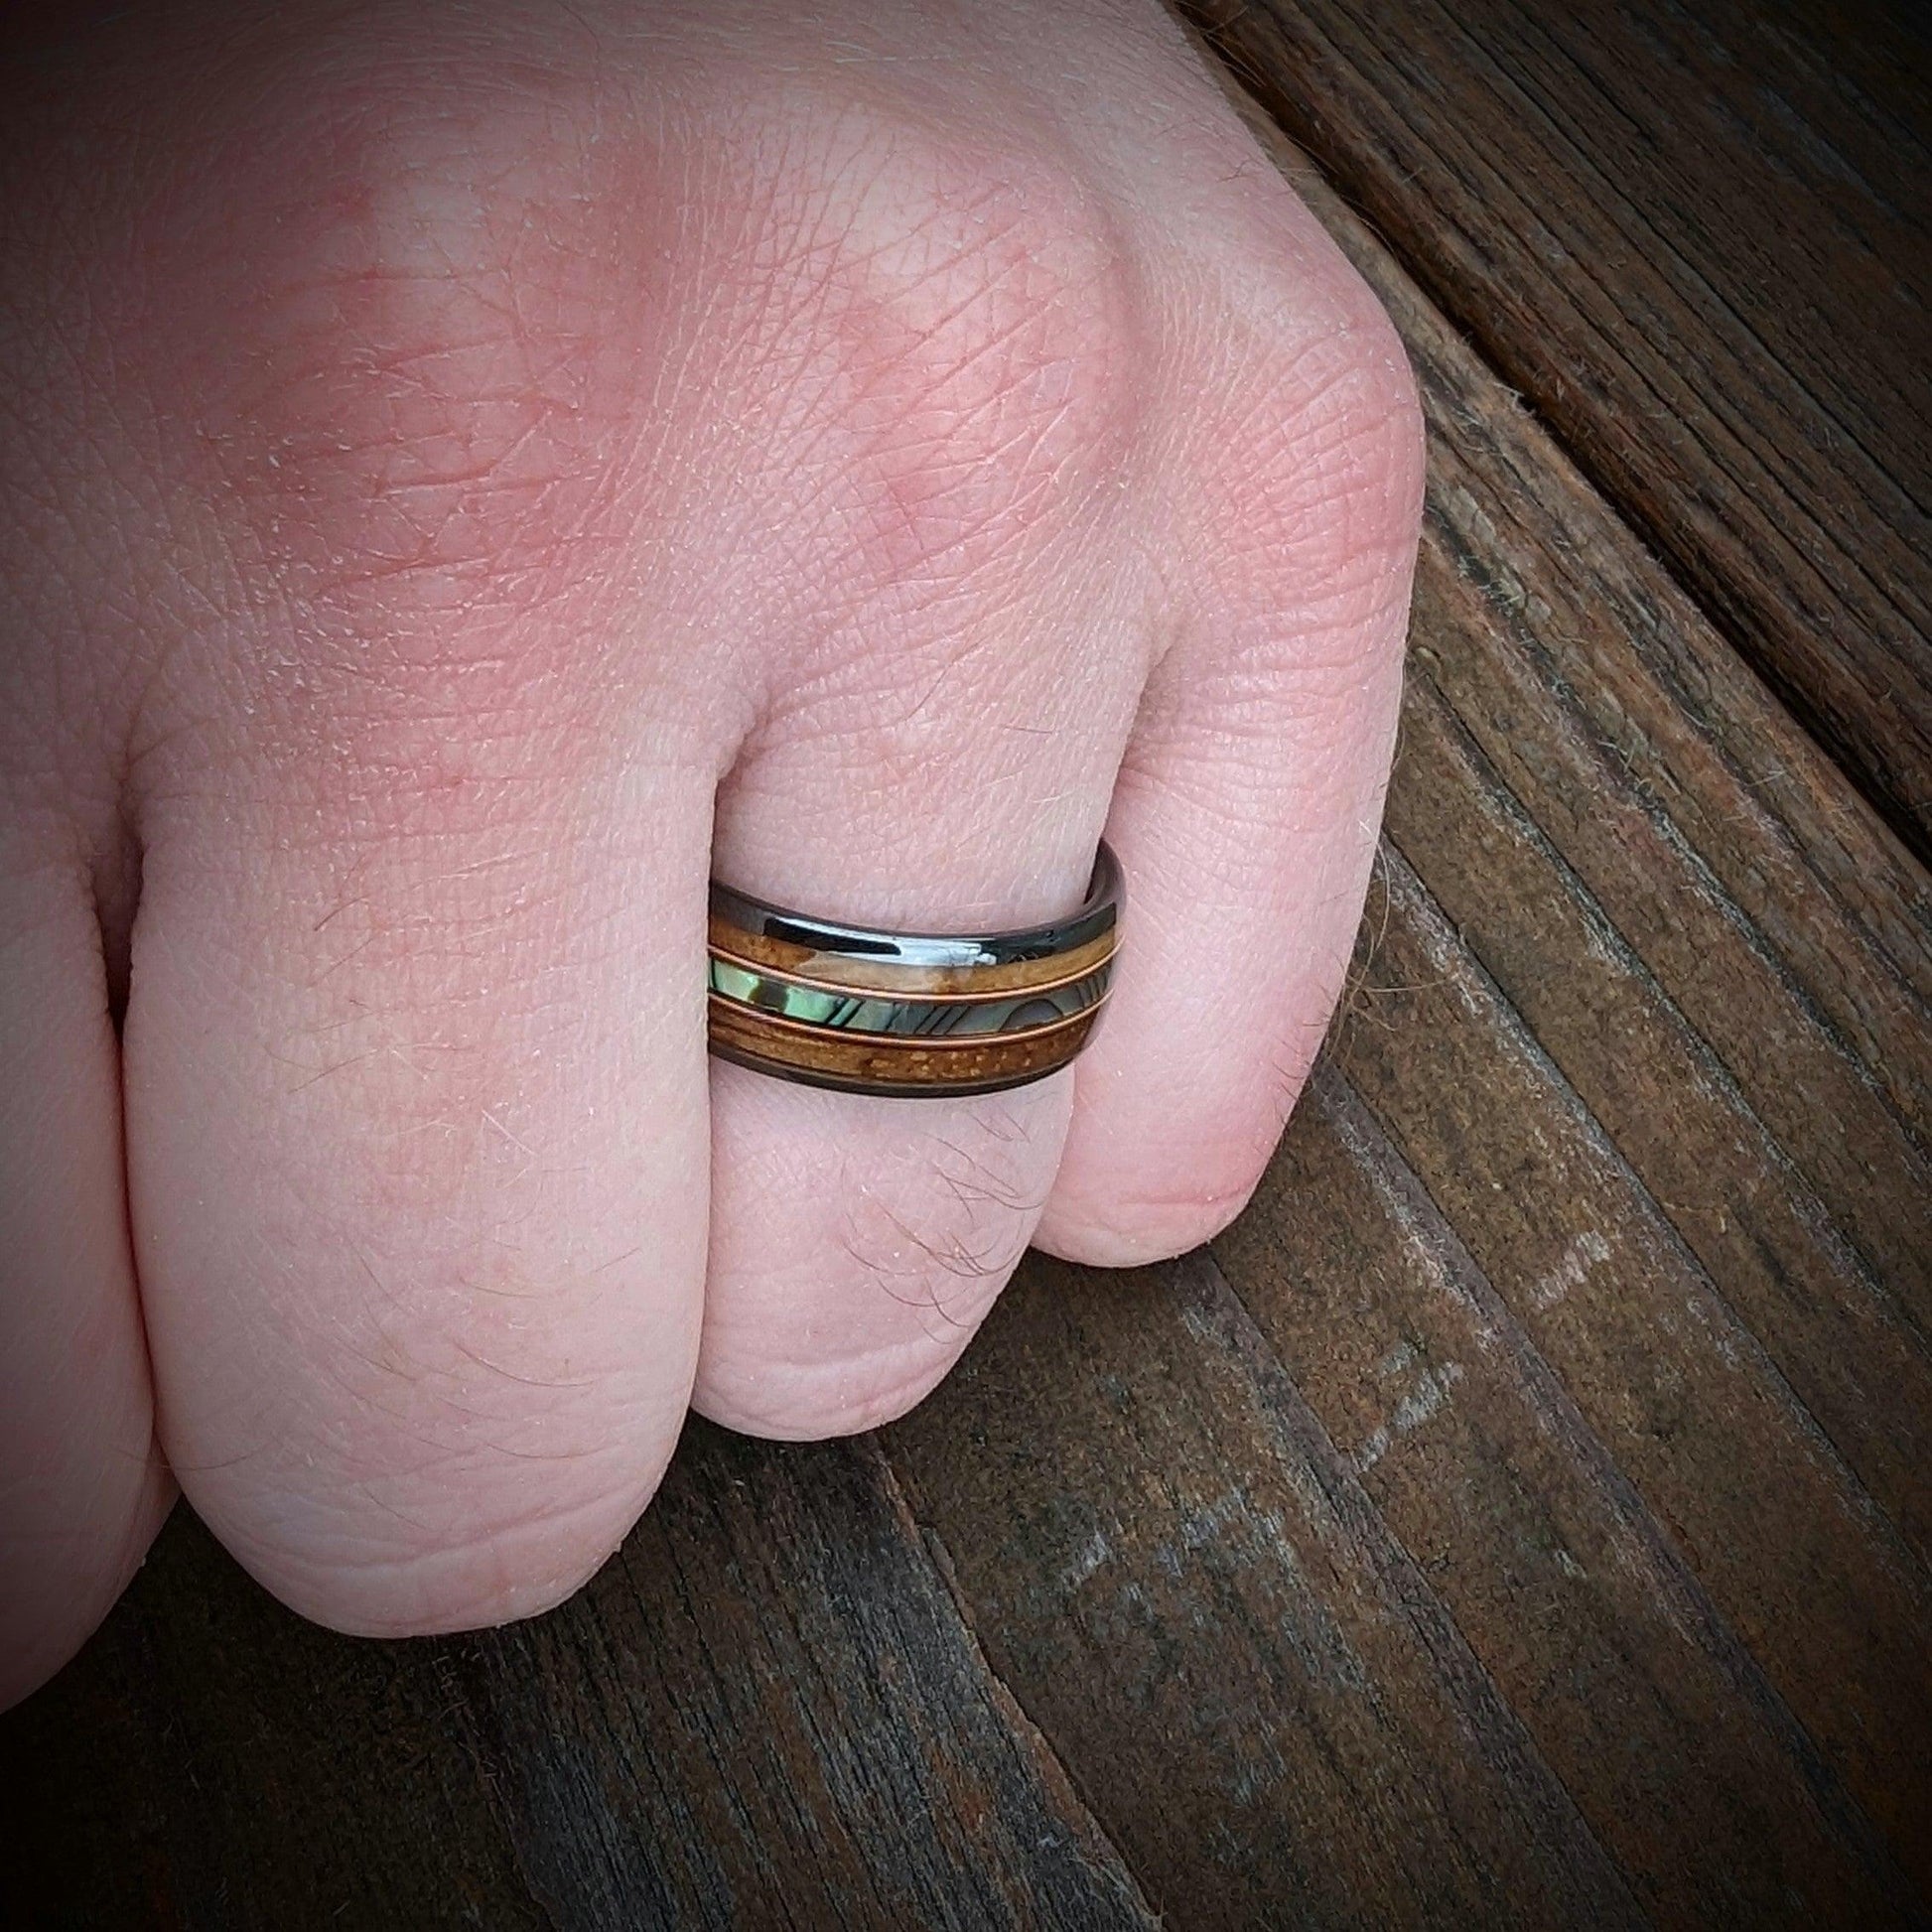 Hammered Guitar String Ring, Guitar String Ring, Guitar String Jewelry,  Hammered Ring, Bronze Ring, Copper Ring, Unique Ring, Guitar Gifts - Etsy |  Guitar string jewelry, Guitar jewelry, Guitar gifts